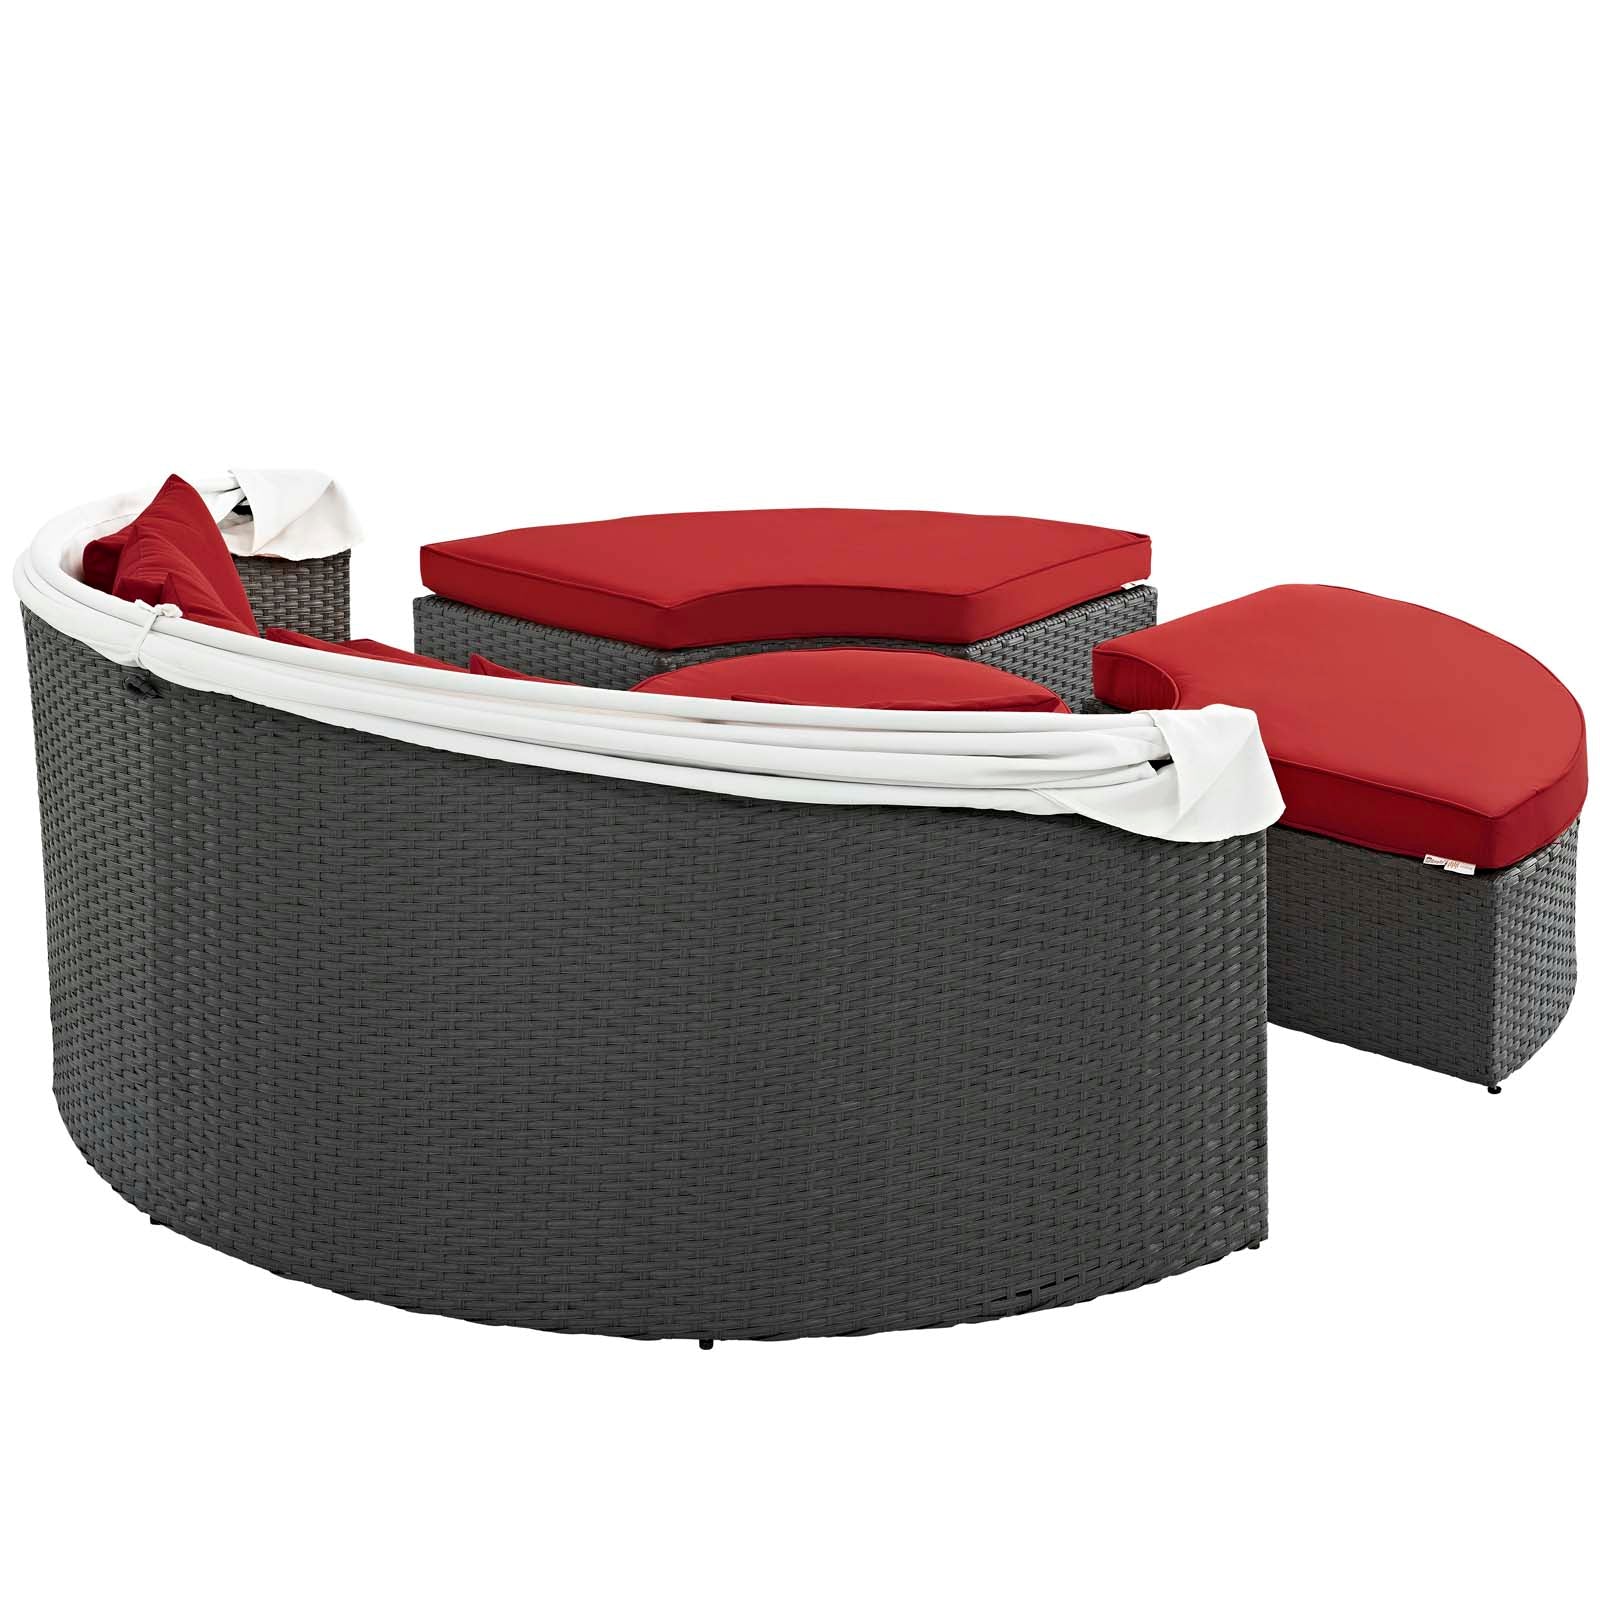 Sojourn Outdoor Patio Sunbrella Daybed Canvas Red